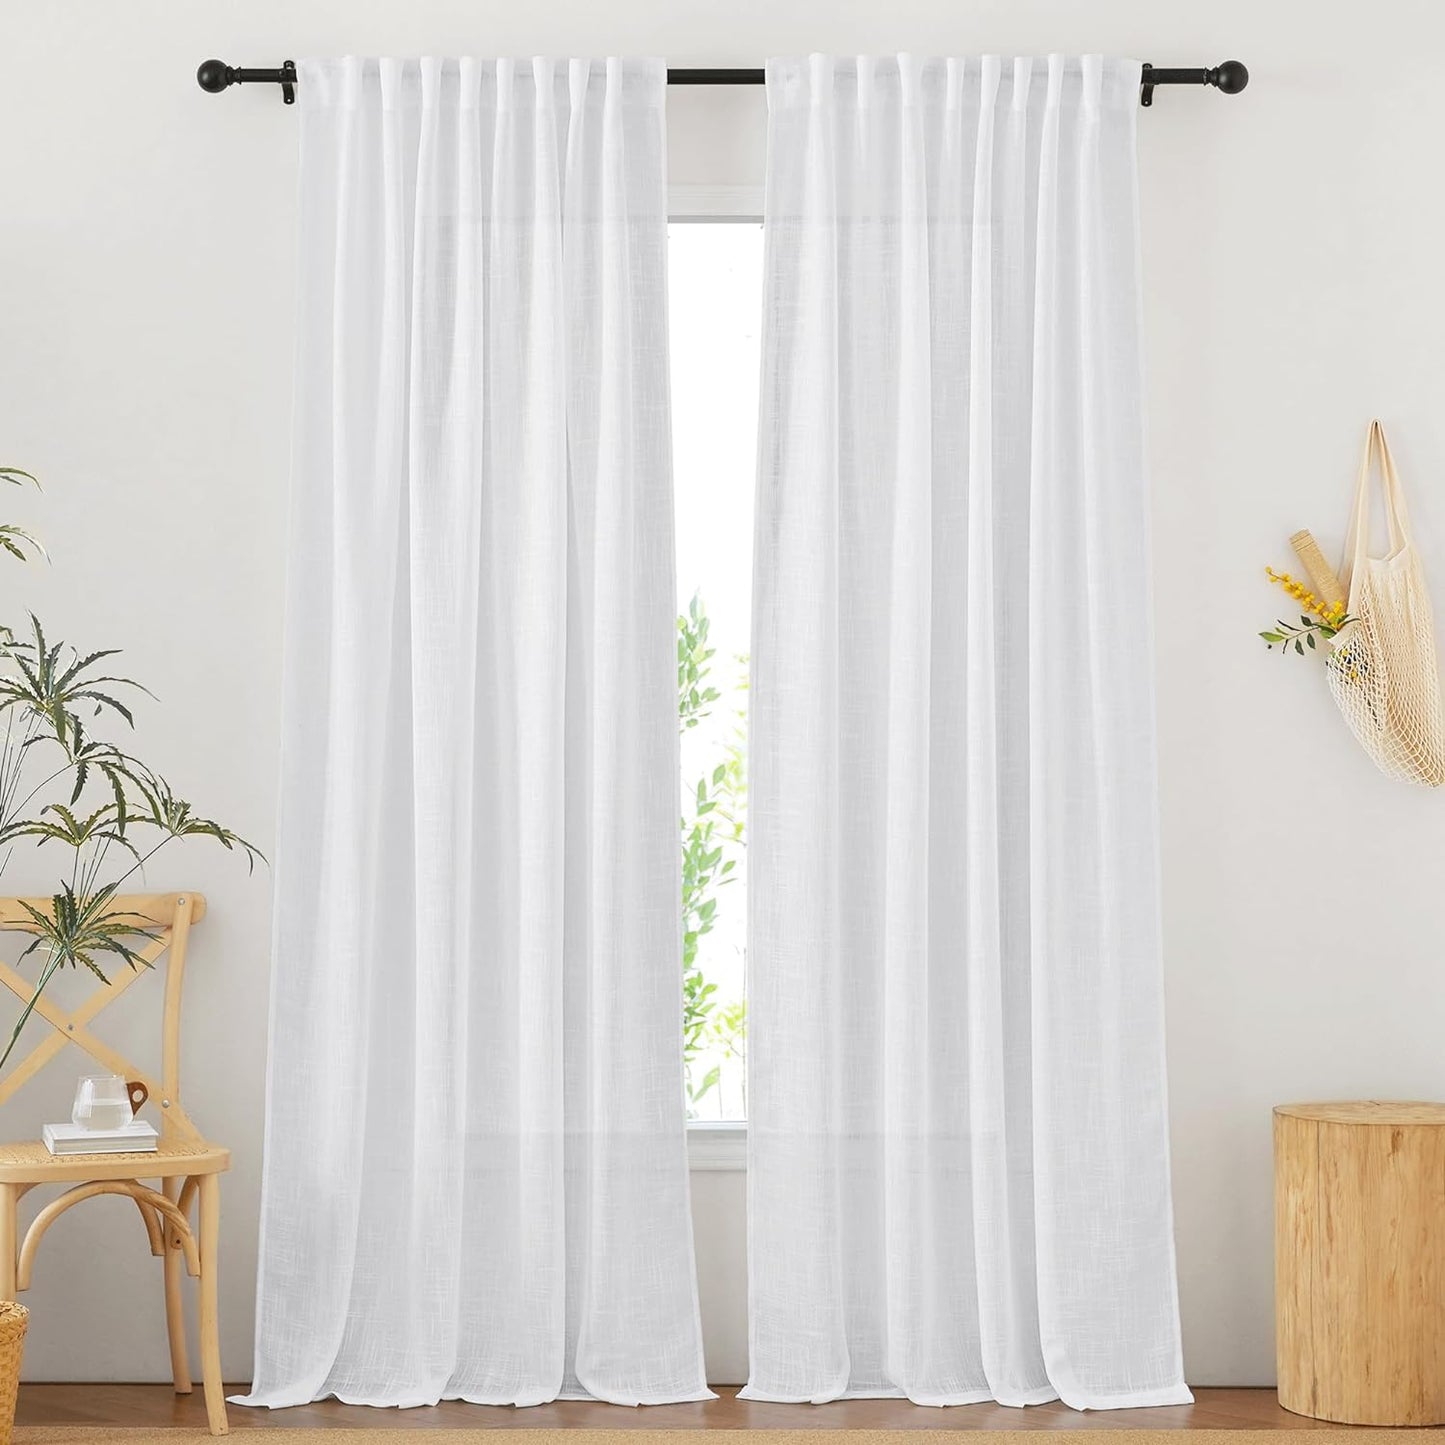 NICETOWN White Curtains Sheer - Semi Sheer Window Covering, Light & Airy Privacy Rod Pocket Back Tab Pinche Pleated Drapes for Bedroom Living Room Patio Glass Door, 52 X 63 Inches Long, Set of 2  NICETOWN White W52 X L84 